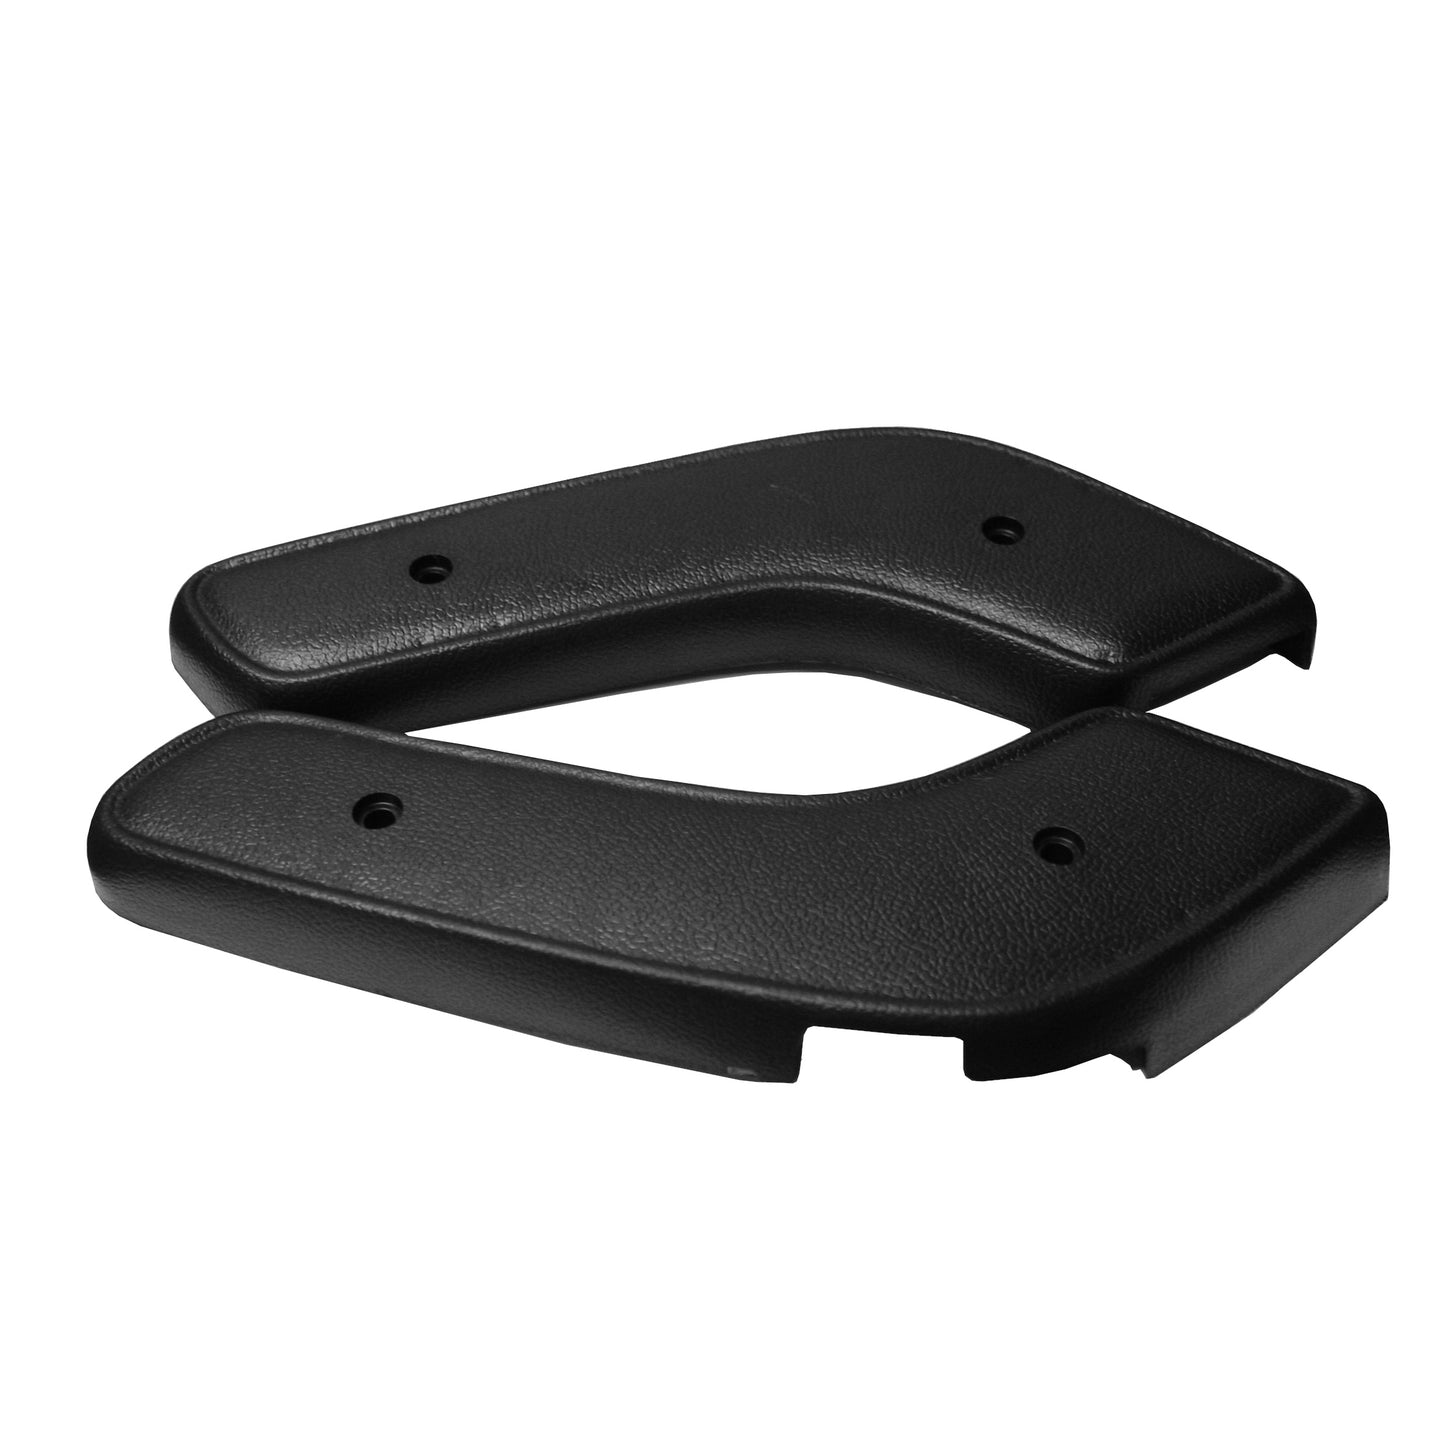 71/74 BENCH HINGE COVERS - BLK